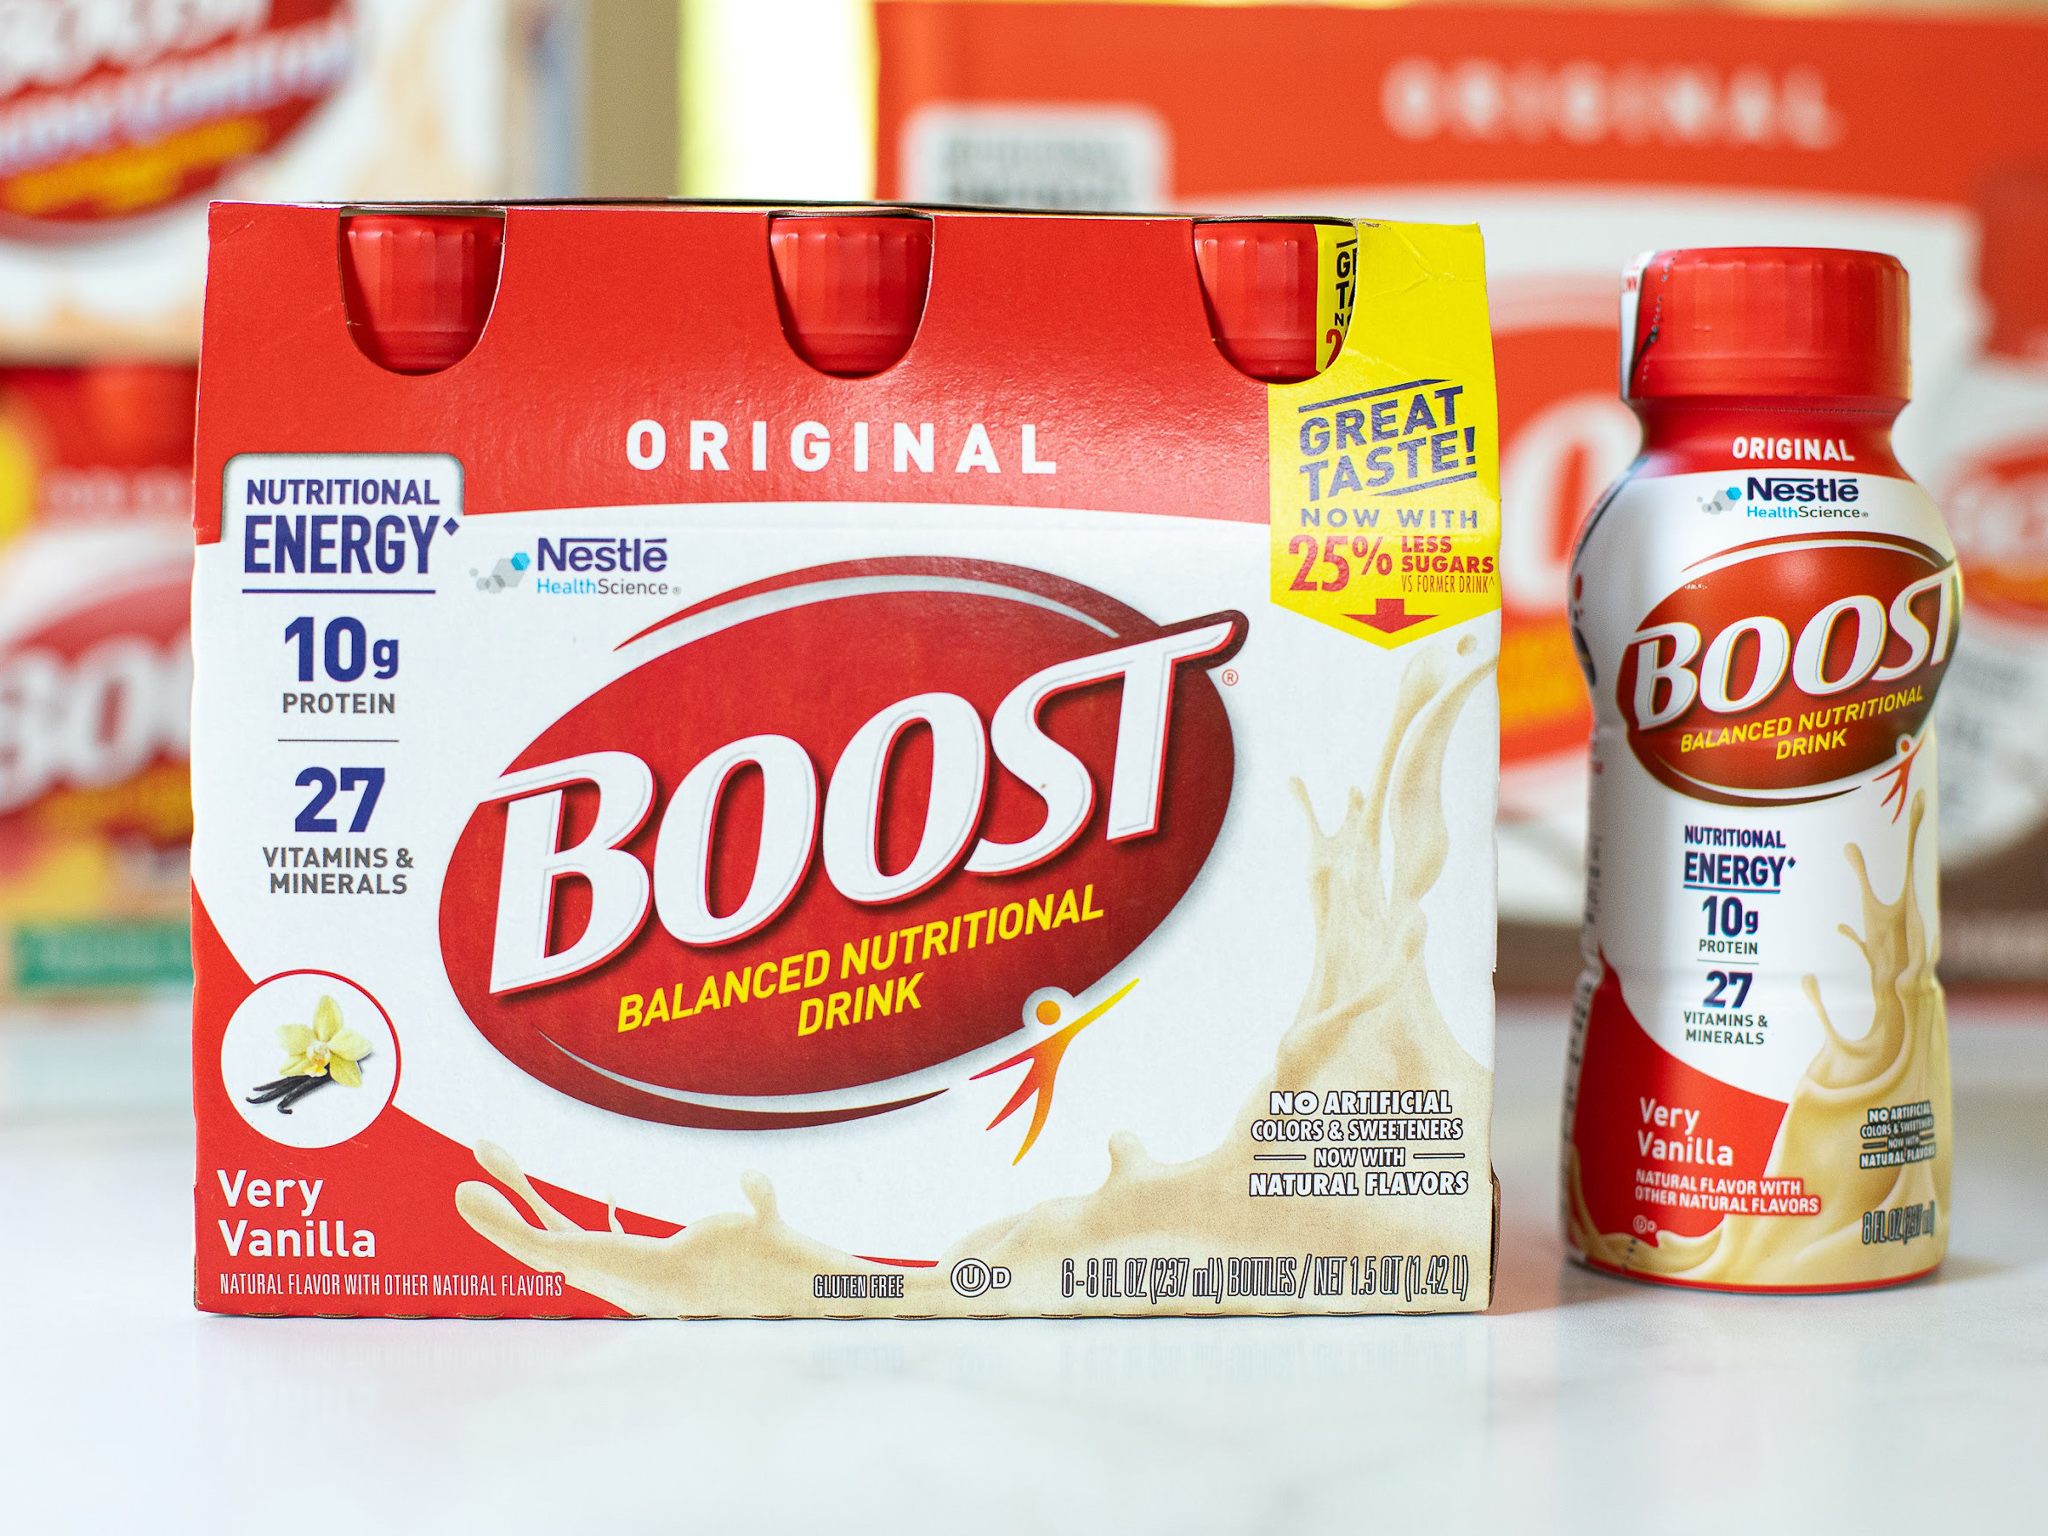 Get Boost Nutritional Drinks As Low As $5.29 Per Pack At Publix (Regular Price $10.79)